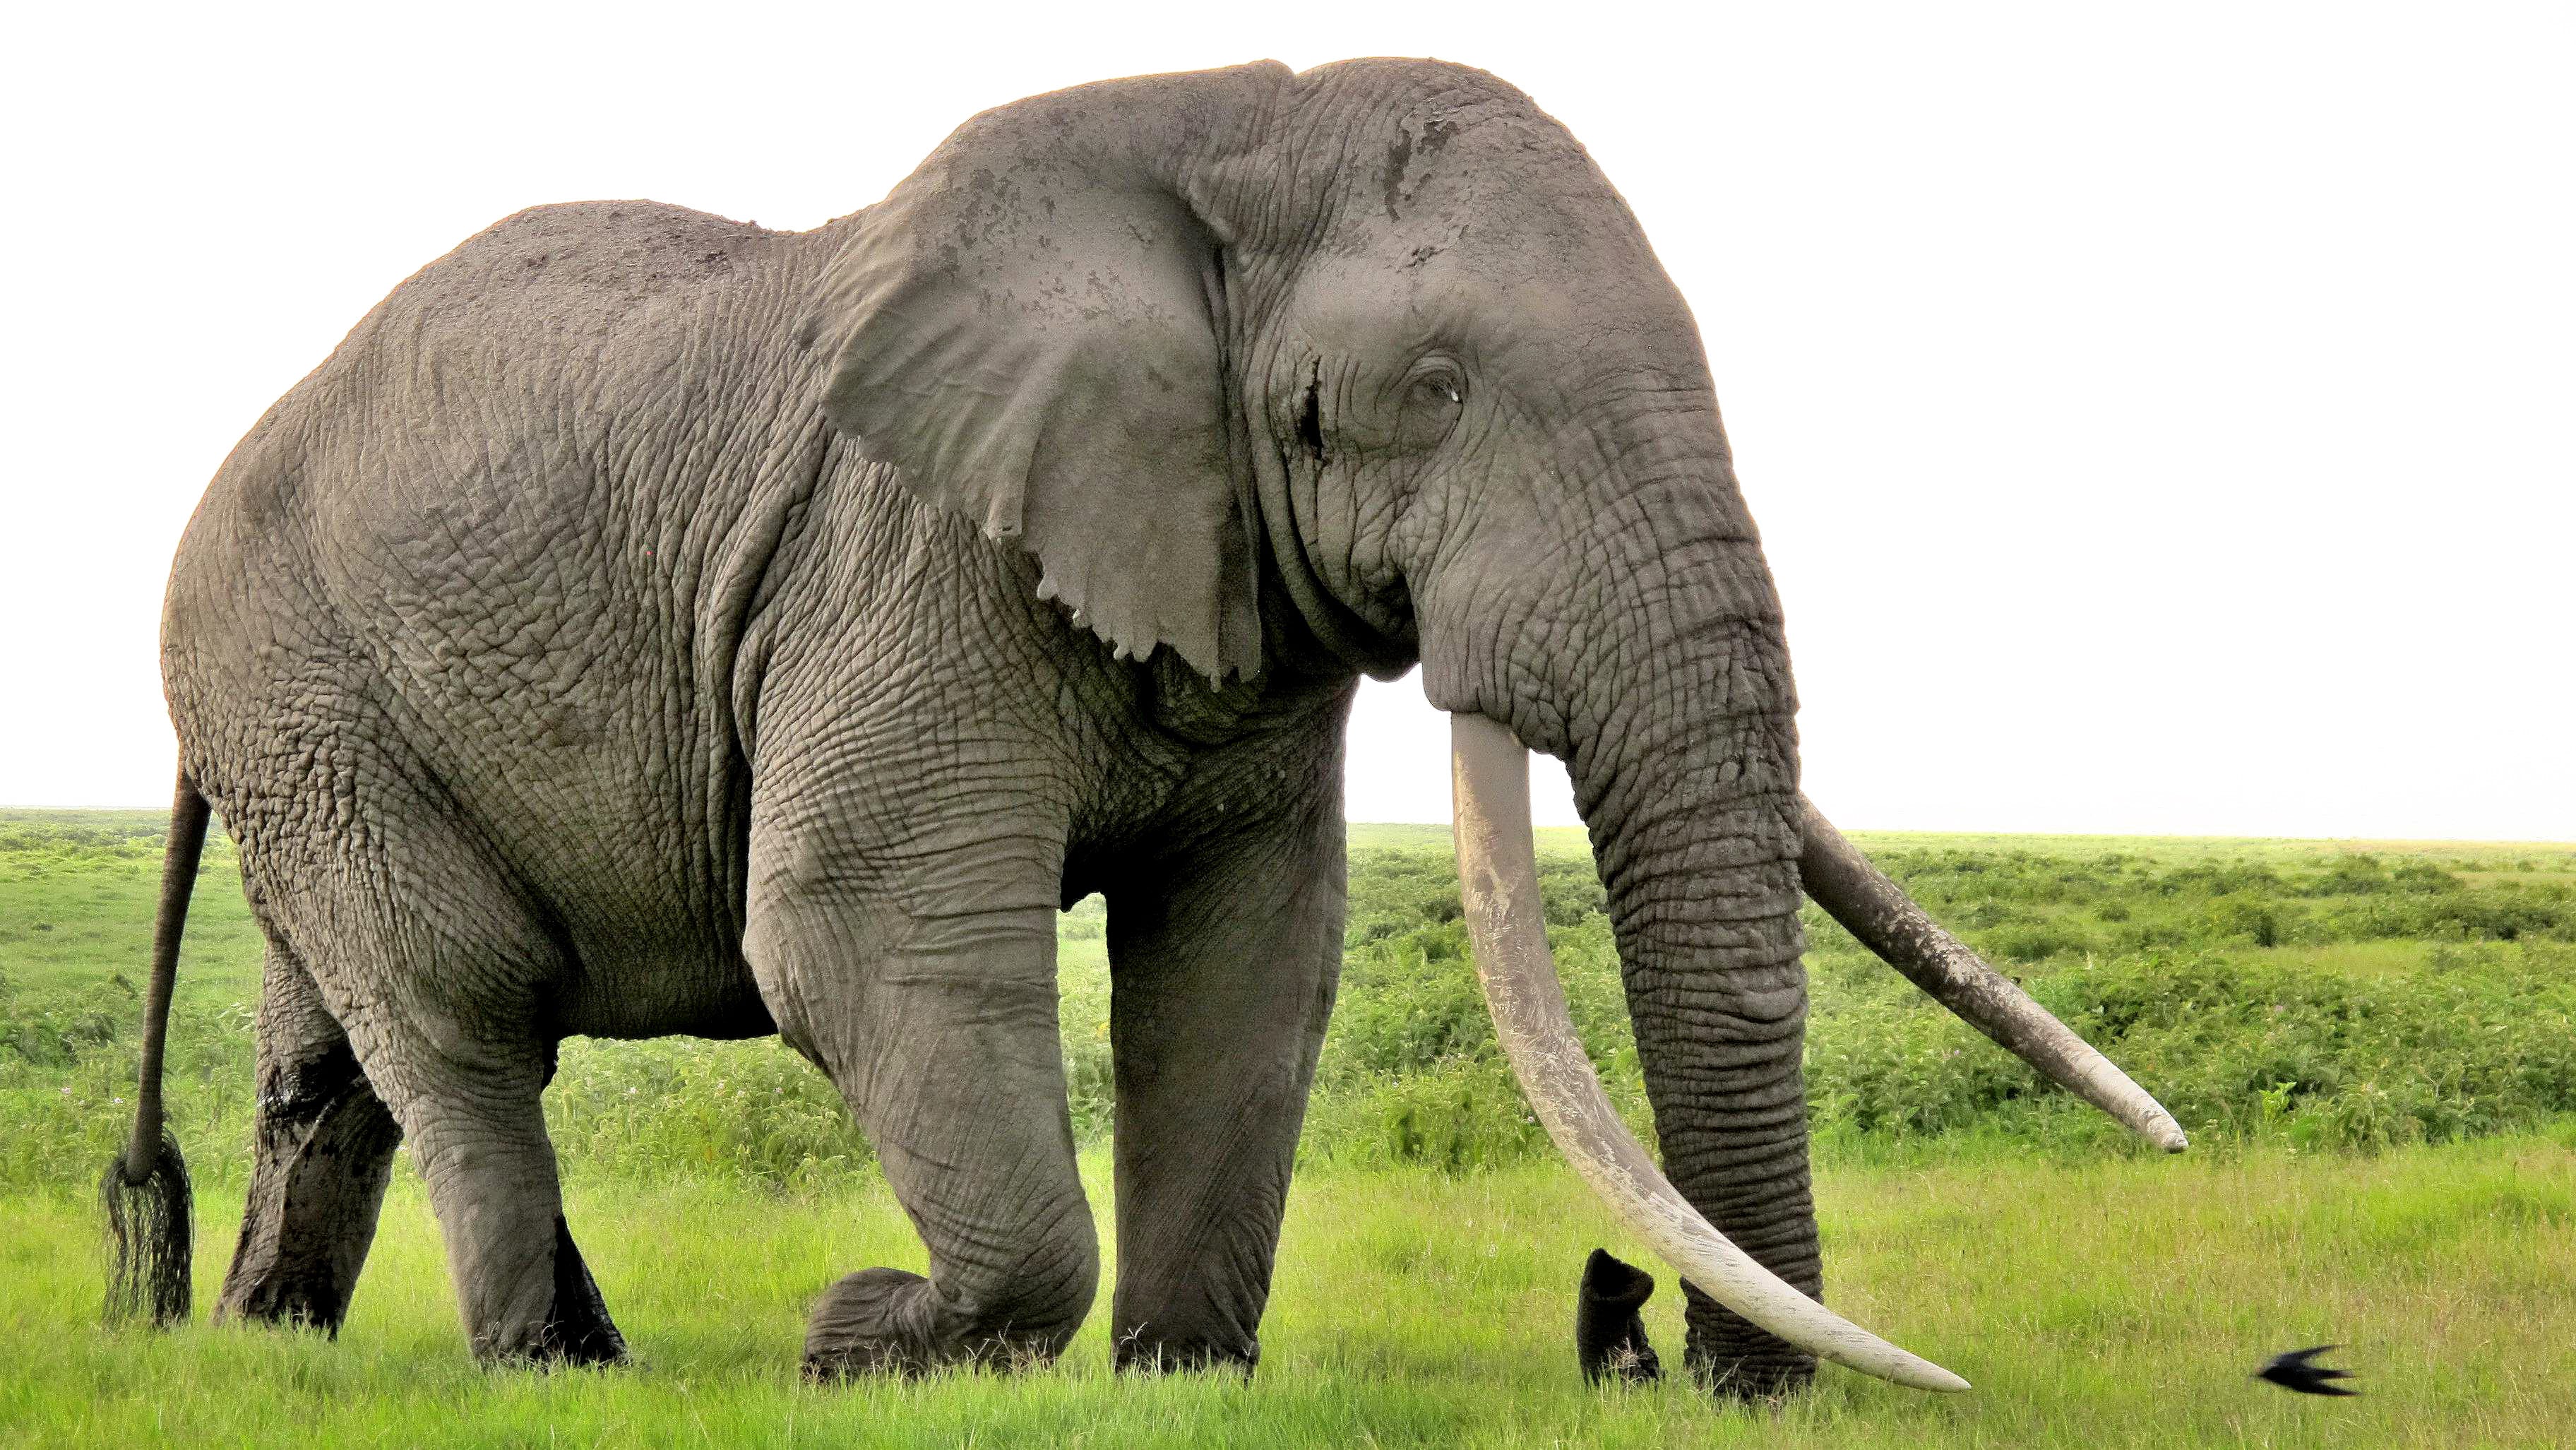 What Does It Mean That Another Giant Elephant Has Fallen?, by Carl Safina